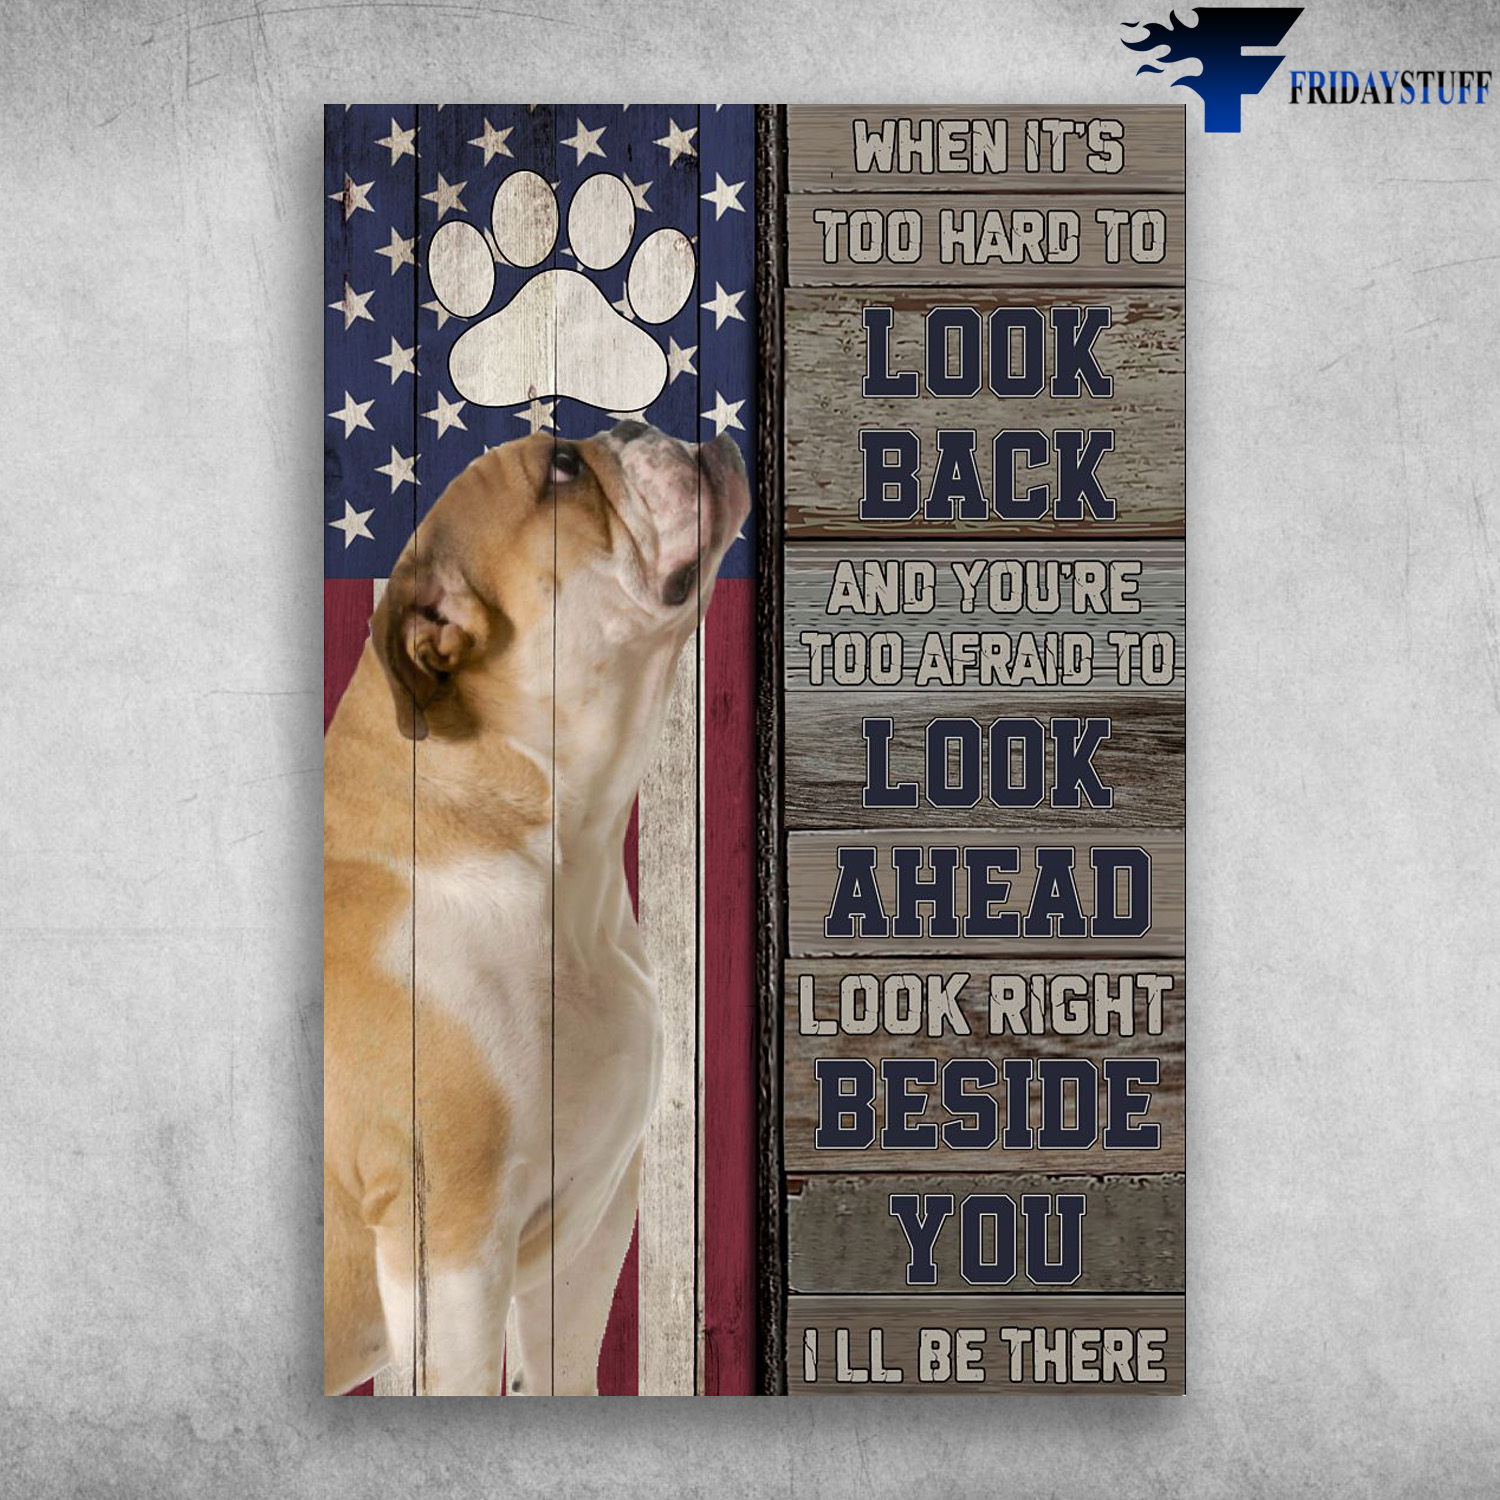 Bulldog American - When It's Too Hard To Look Back And You're Too Afraid To Look Ahead, Look Right Beside You I'll Be There